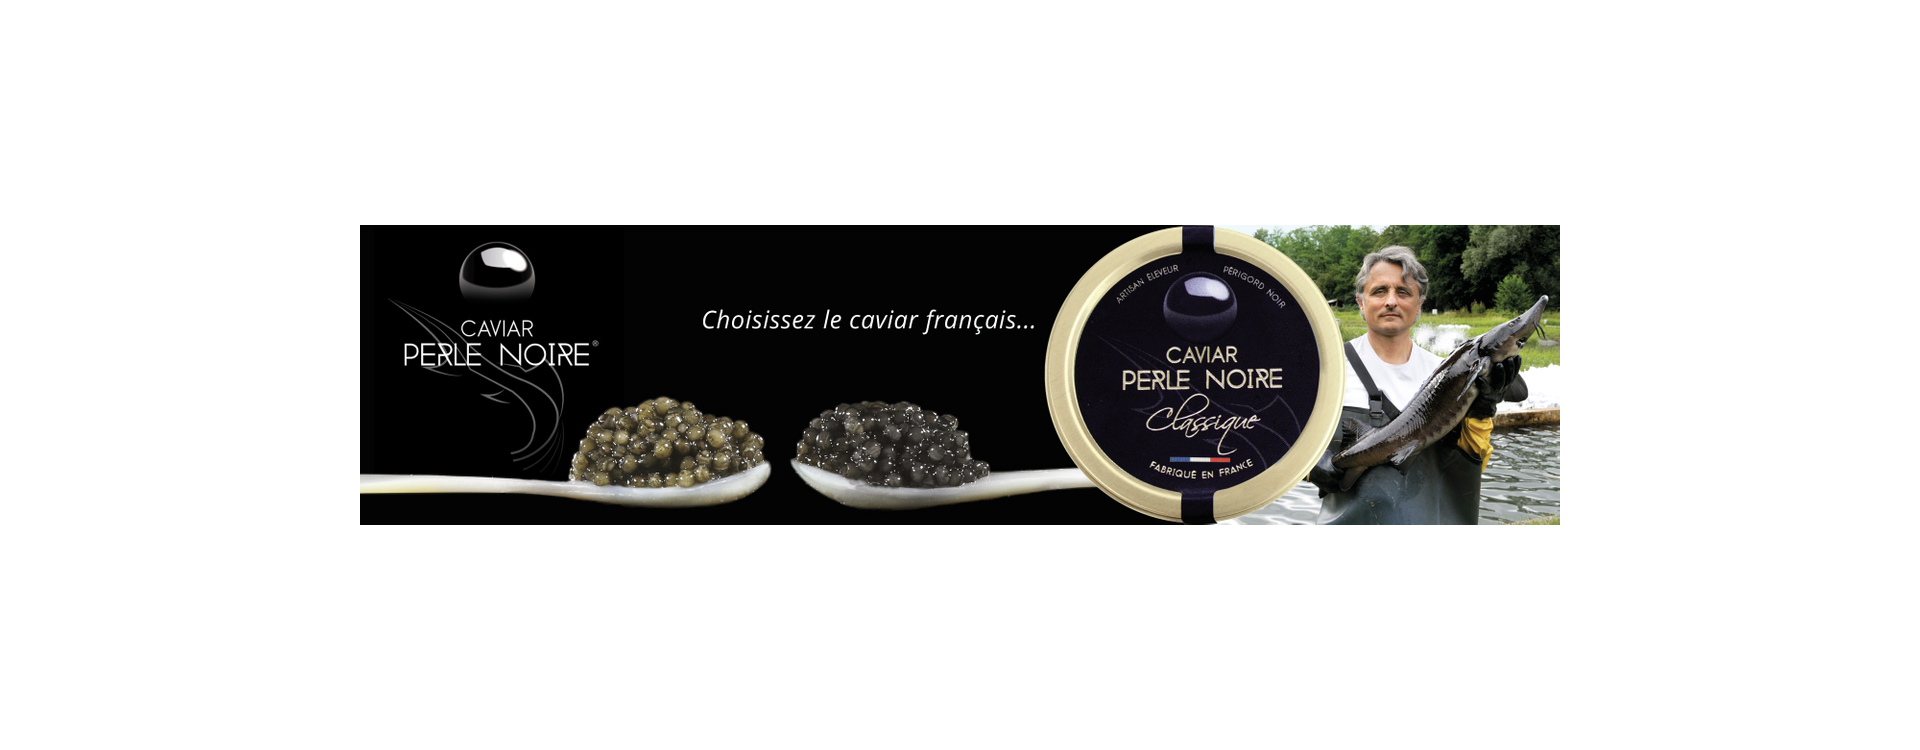 The DNA of Perle Noire® Caviar